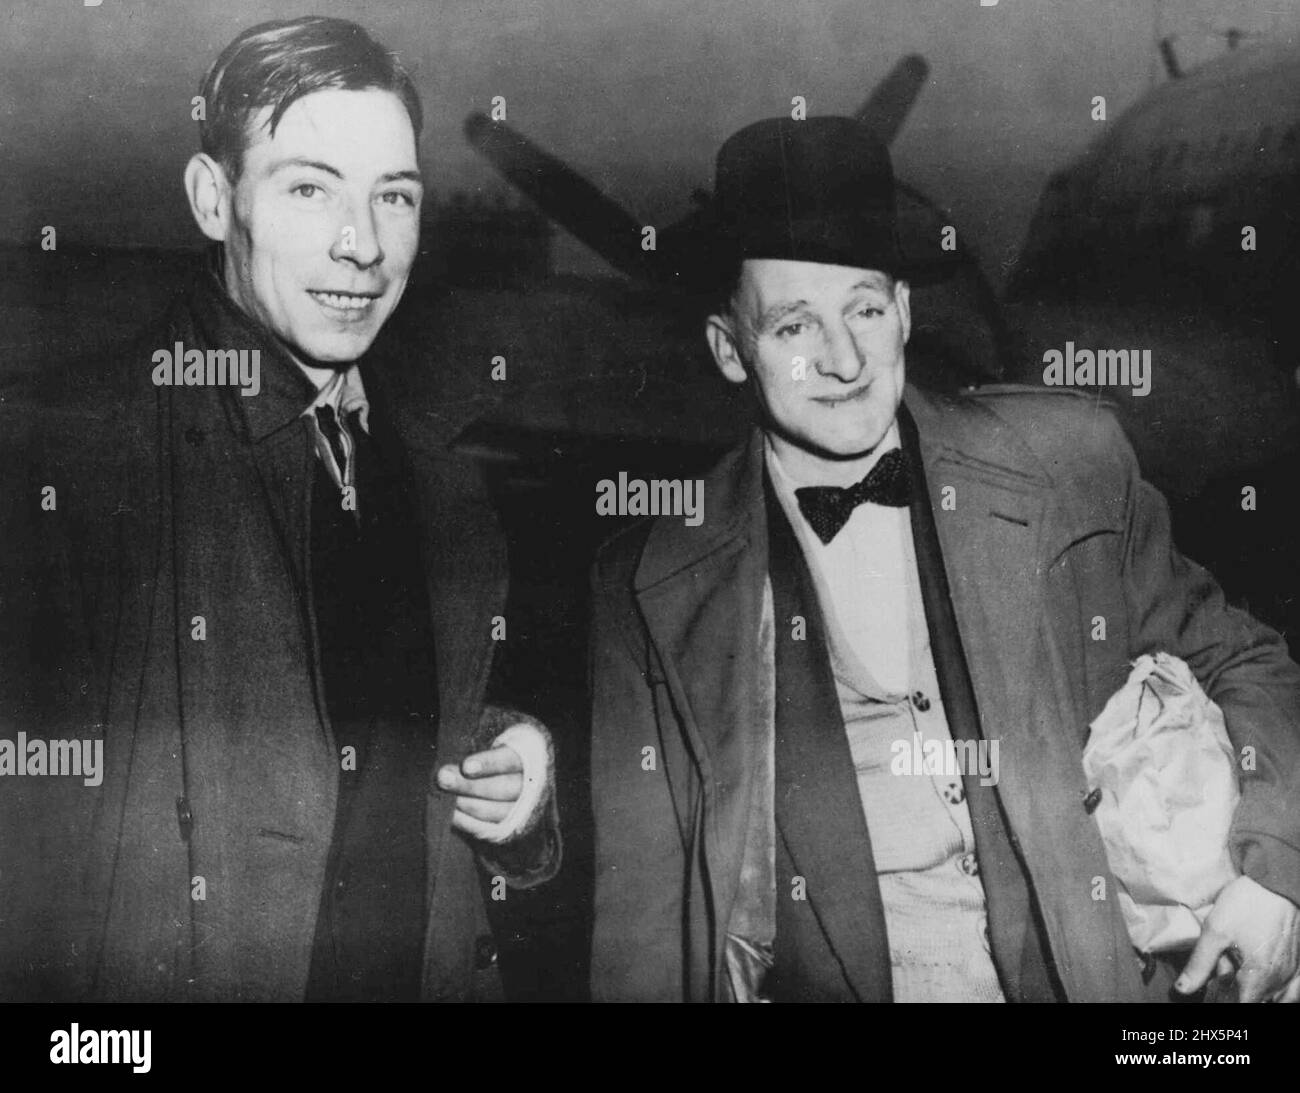 Londoners Fly To German 'Slave Labour' Test Case R.W. Ferris (left) and Charles C.J. Coward, Both of London and former prisoners of war in Germany, arrive by air in Frankfurt today February 18. They are to give evidence in a claim by a former 'Slave Labourer' against the I.G. Farben Combine. It is a test case for more than 100 other former 'Slaves.' Coward and Ferris are to speak for a former concentration camp inmate, Norbert Wolheim, now living in USA, who claims £833 as wages for work in the Buna-Monowitz syn synthetic rubber plane, near Auschwitz, during the war. February 18, 1953. (Photo Stock Photo